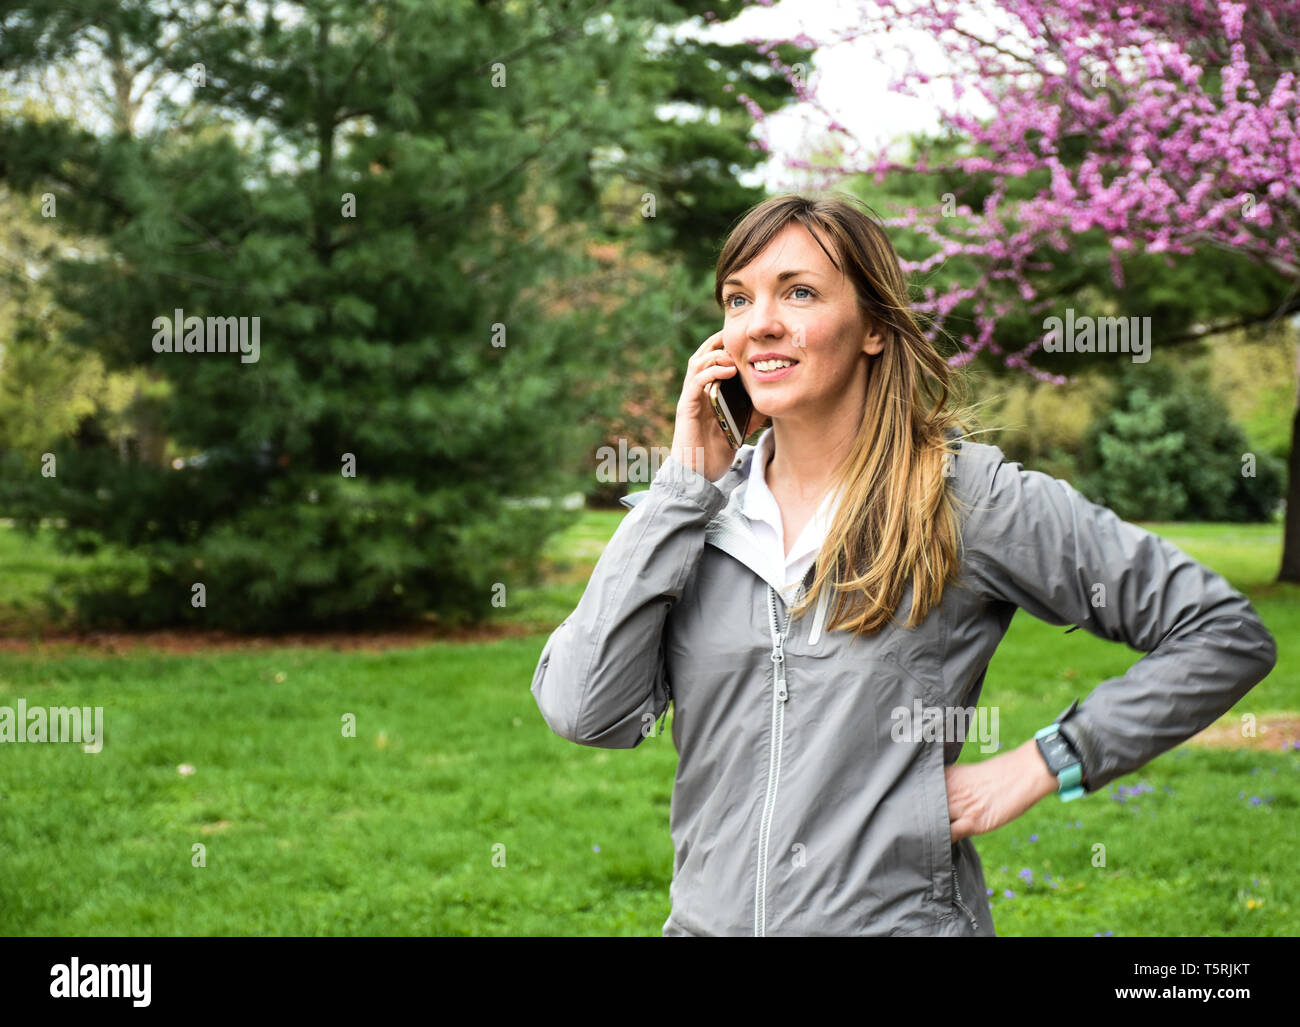 Attractive, smiling young woman talking on cell mobile phone, hands on hips, in city park, pink tree background, green grass, overcast day - Image Stock Photo